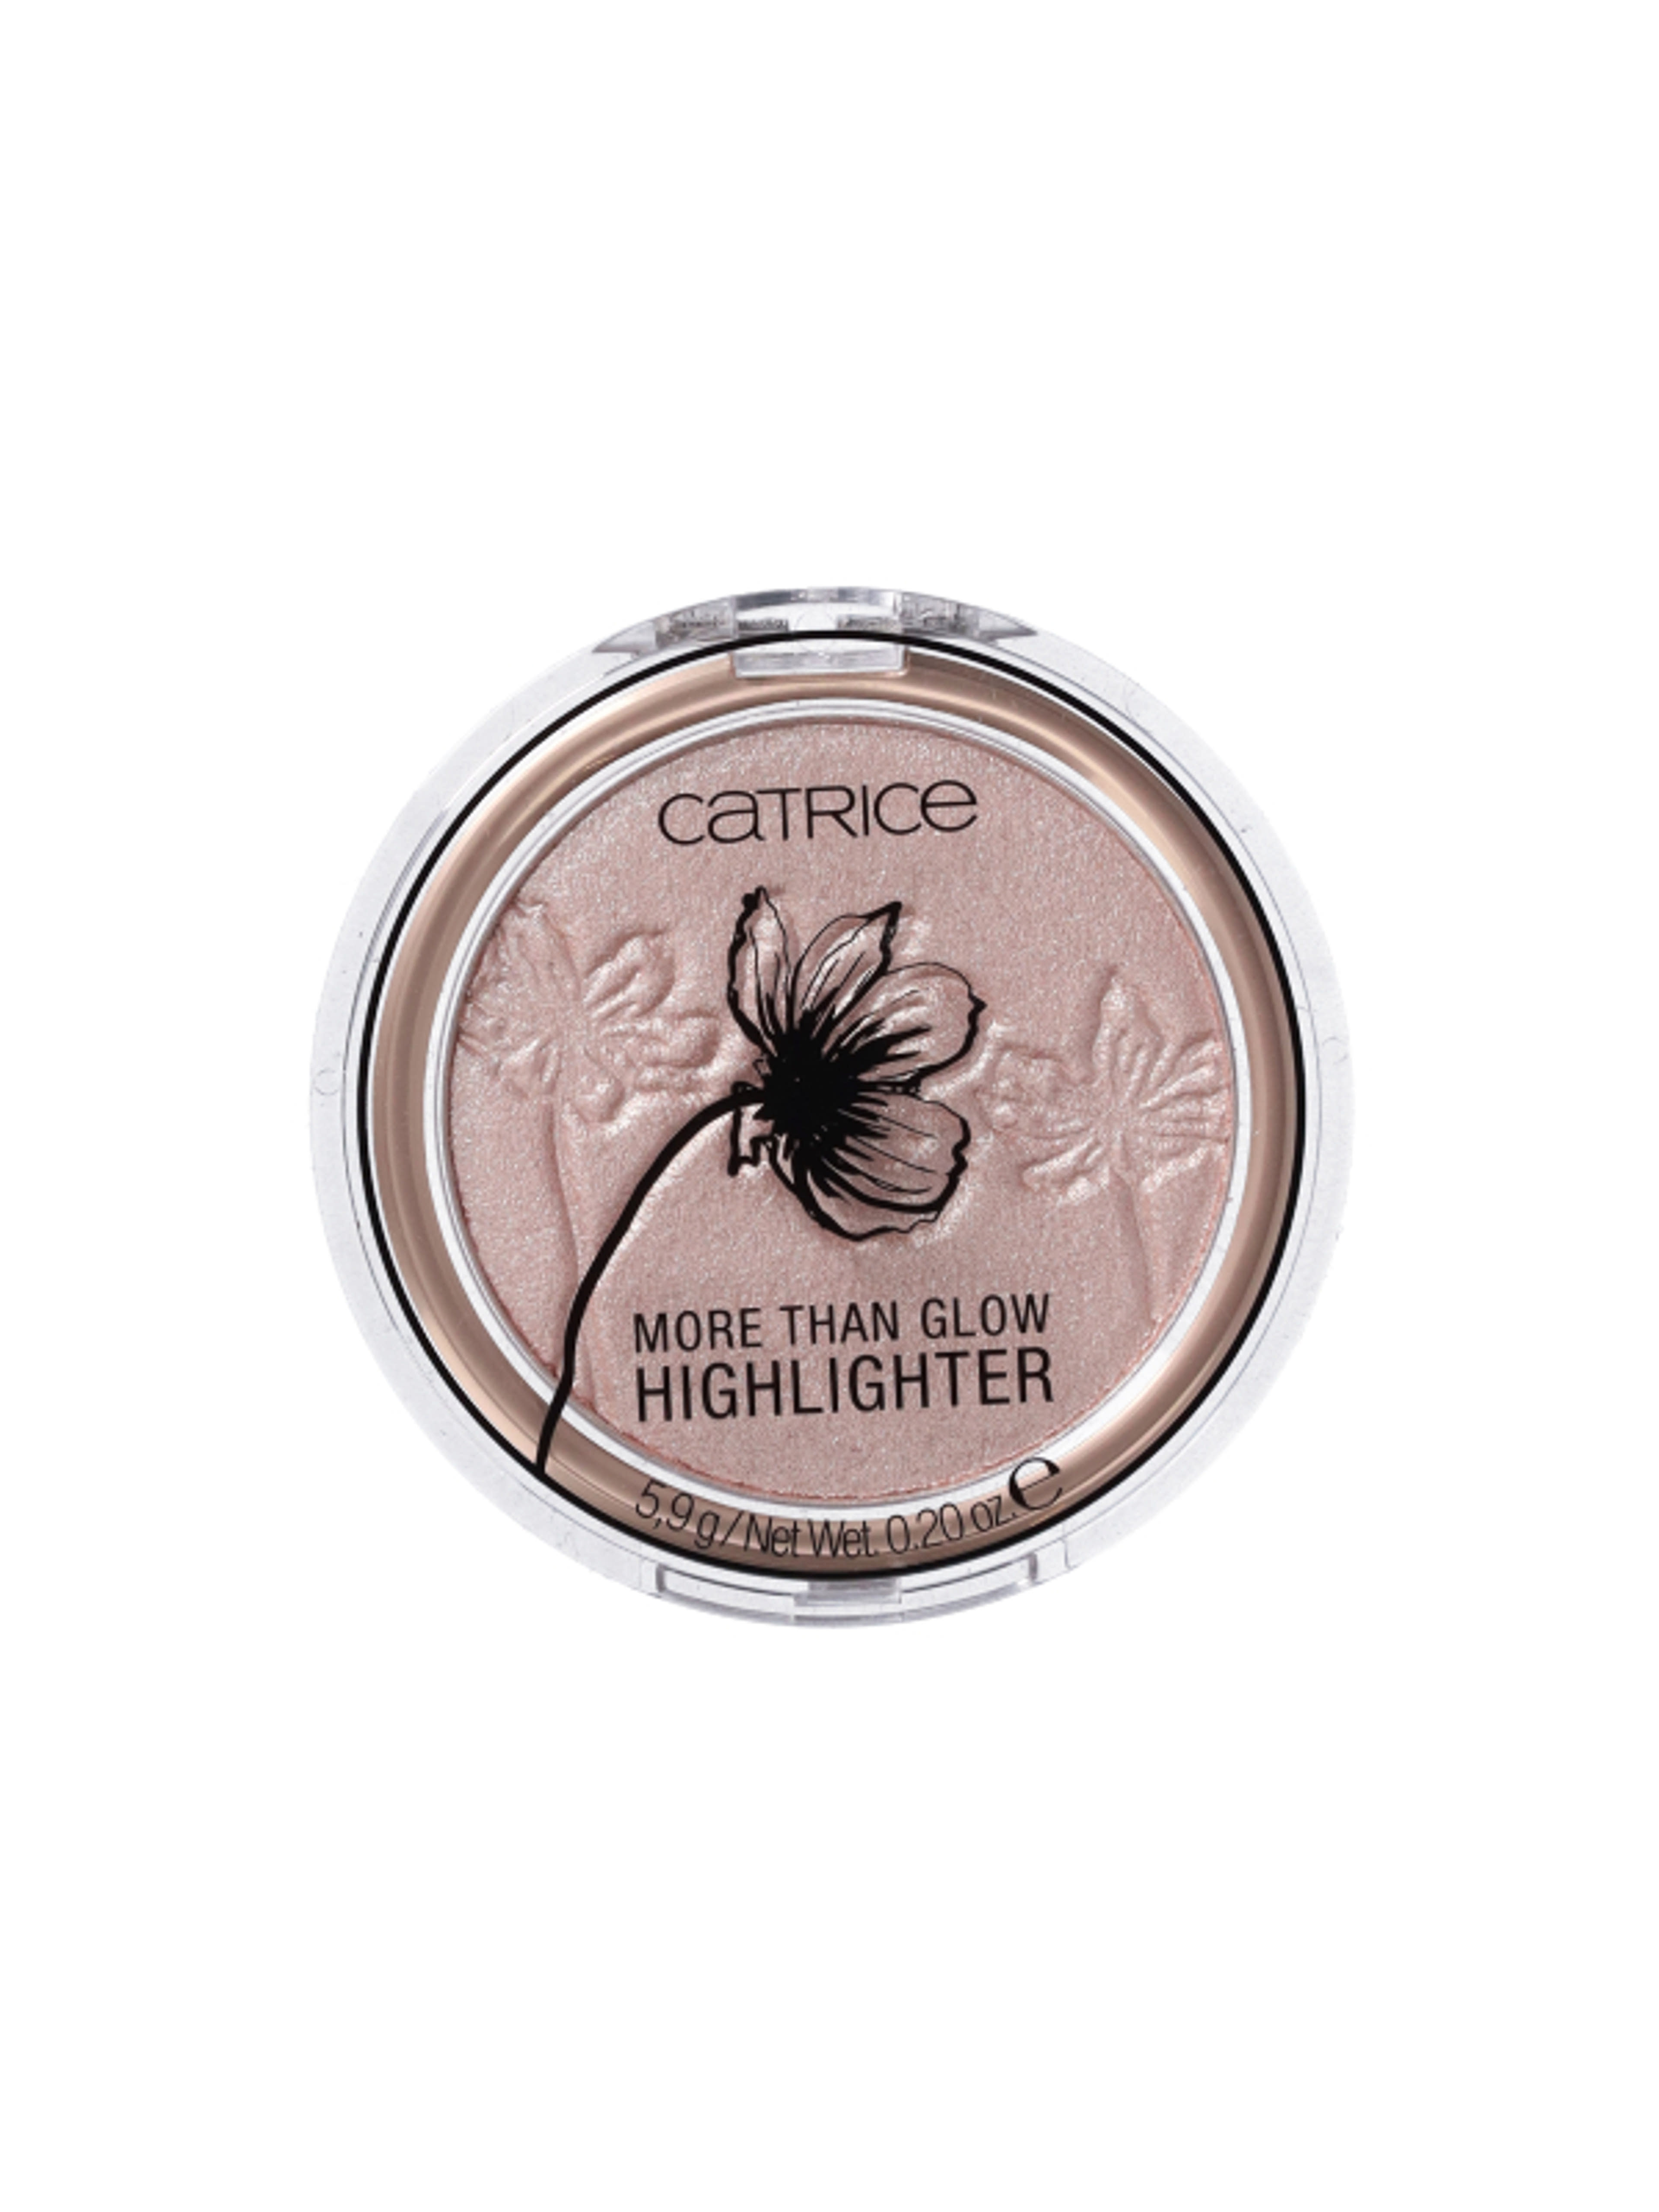 Catrice highlighter more than glow /020 - 1 db